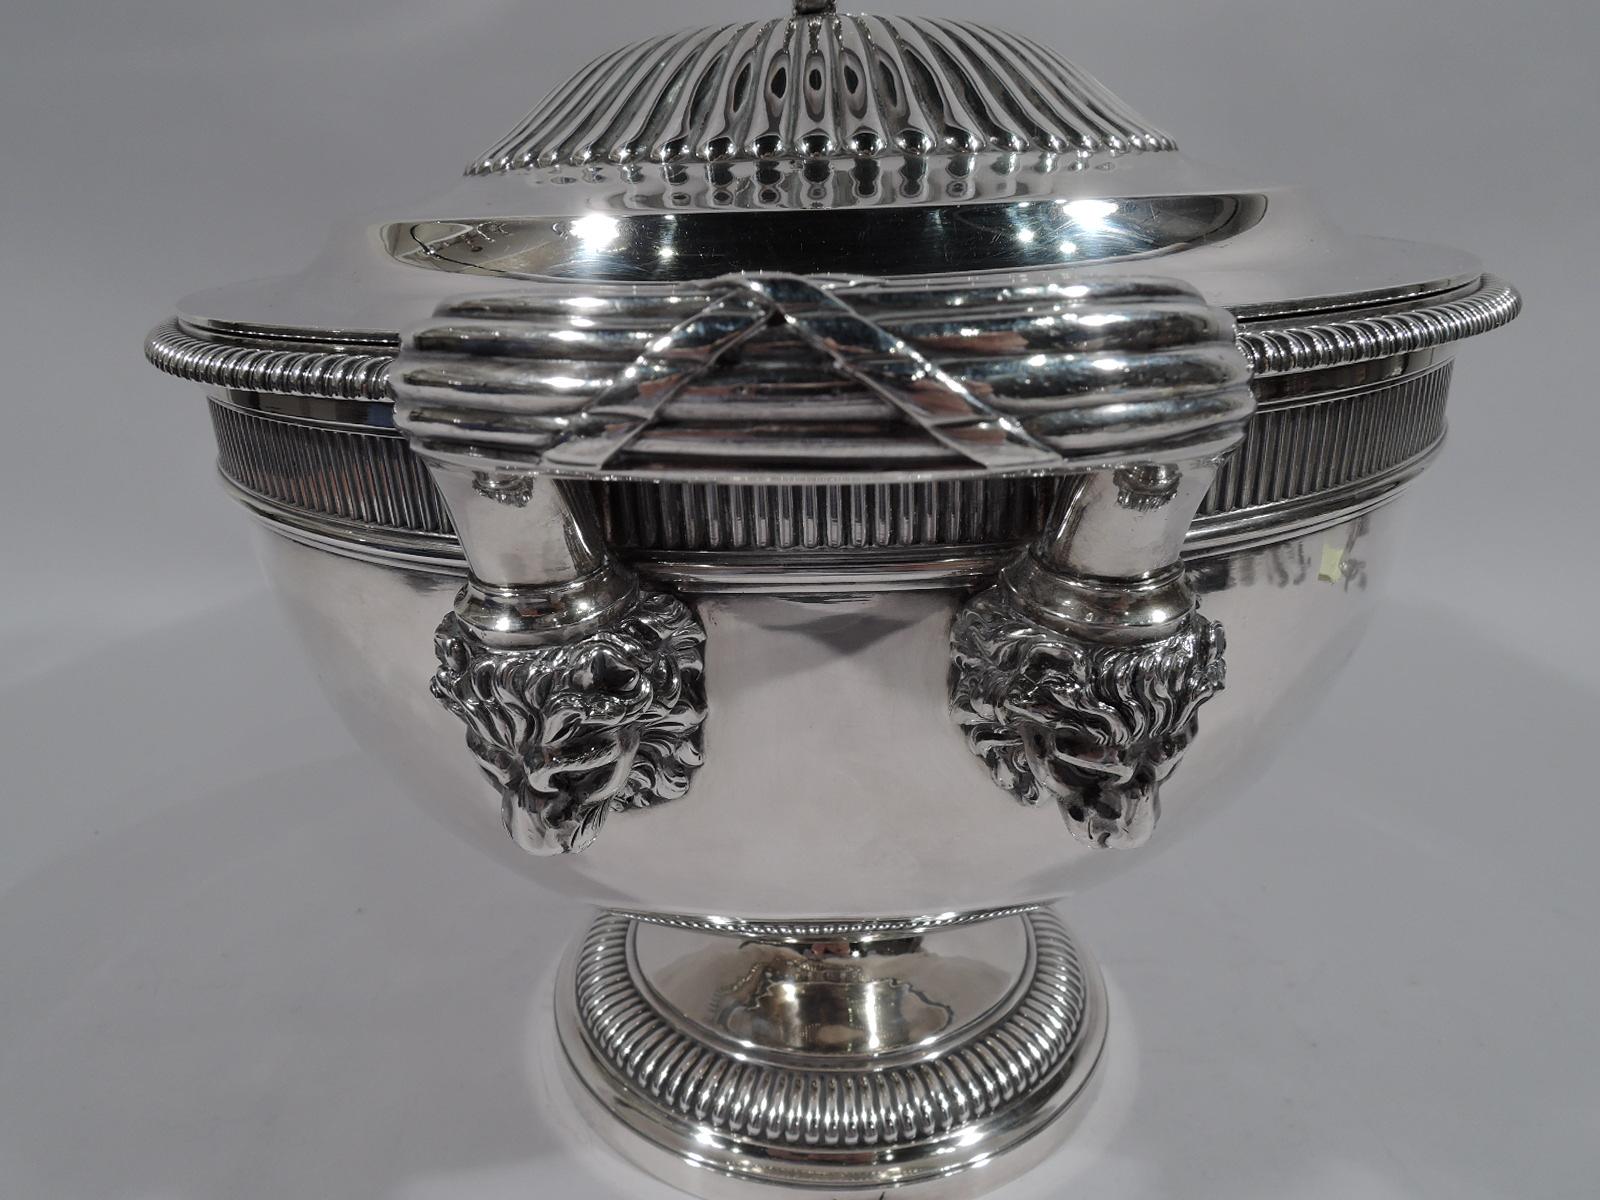 George III sterling silver soup tureen. Made by Paul Storr in London in 1804. Round bowl on raised foot. Reeded bracket side handles with cast lion’s head mounts. Double-domed cover with reeded and leaf-capped ring finial. Ornament: Bead-and-reel,